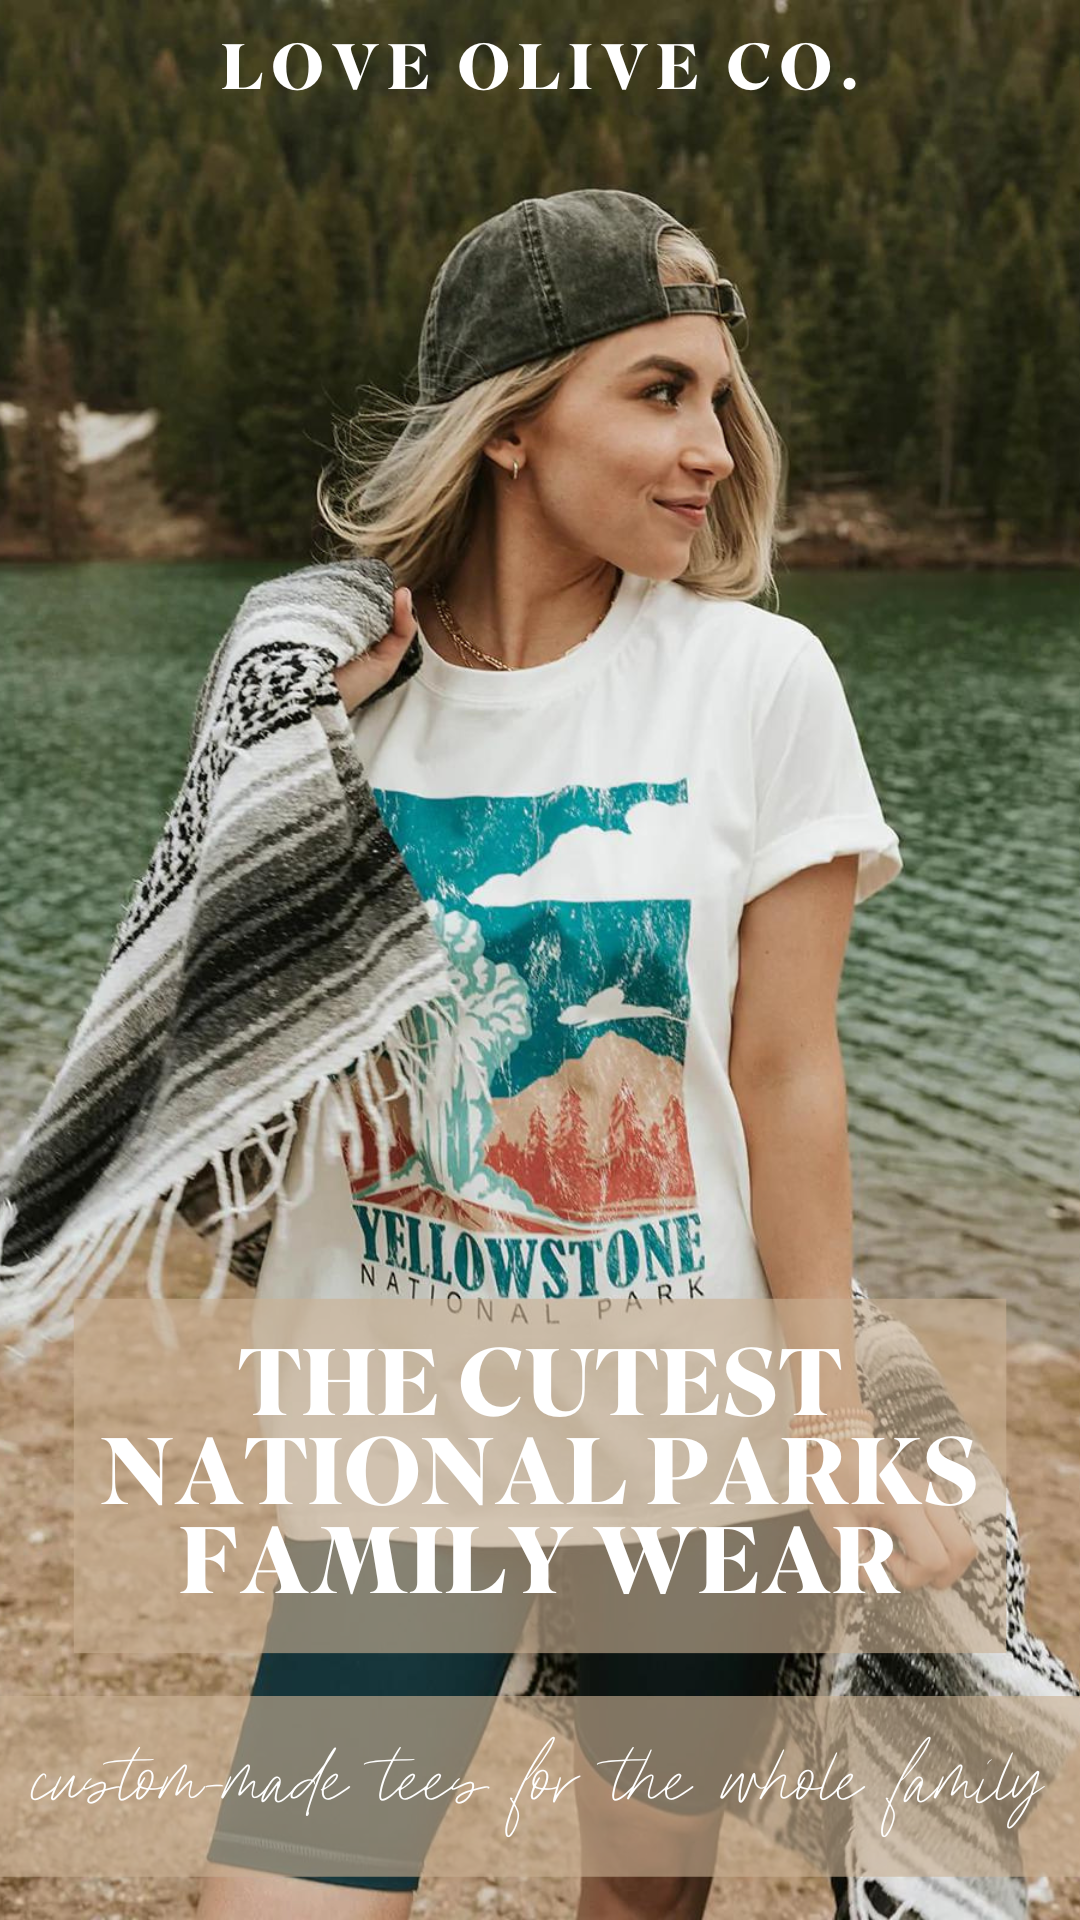 the cutest national parks family wear. www.loveoliveco.com